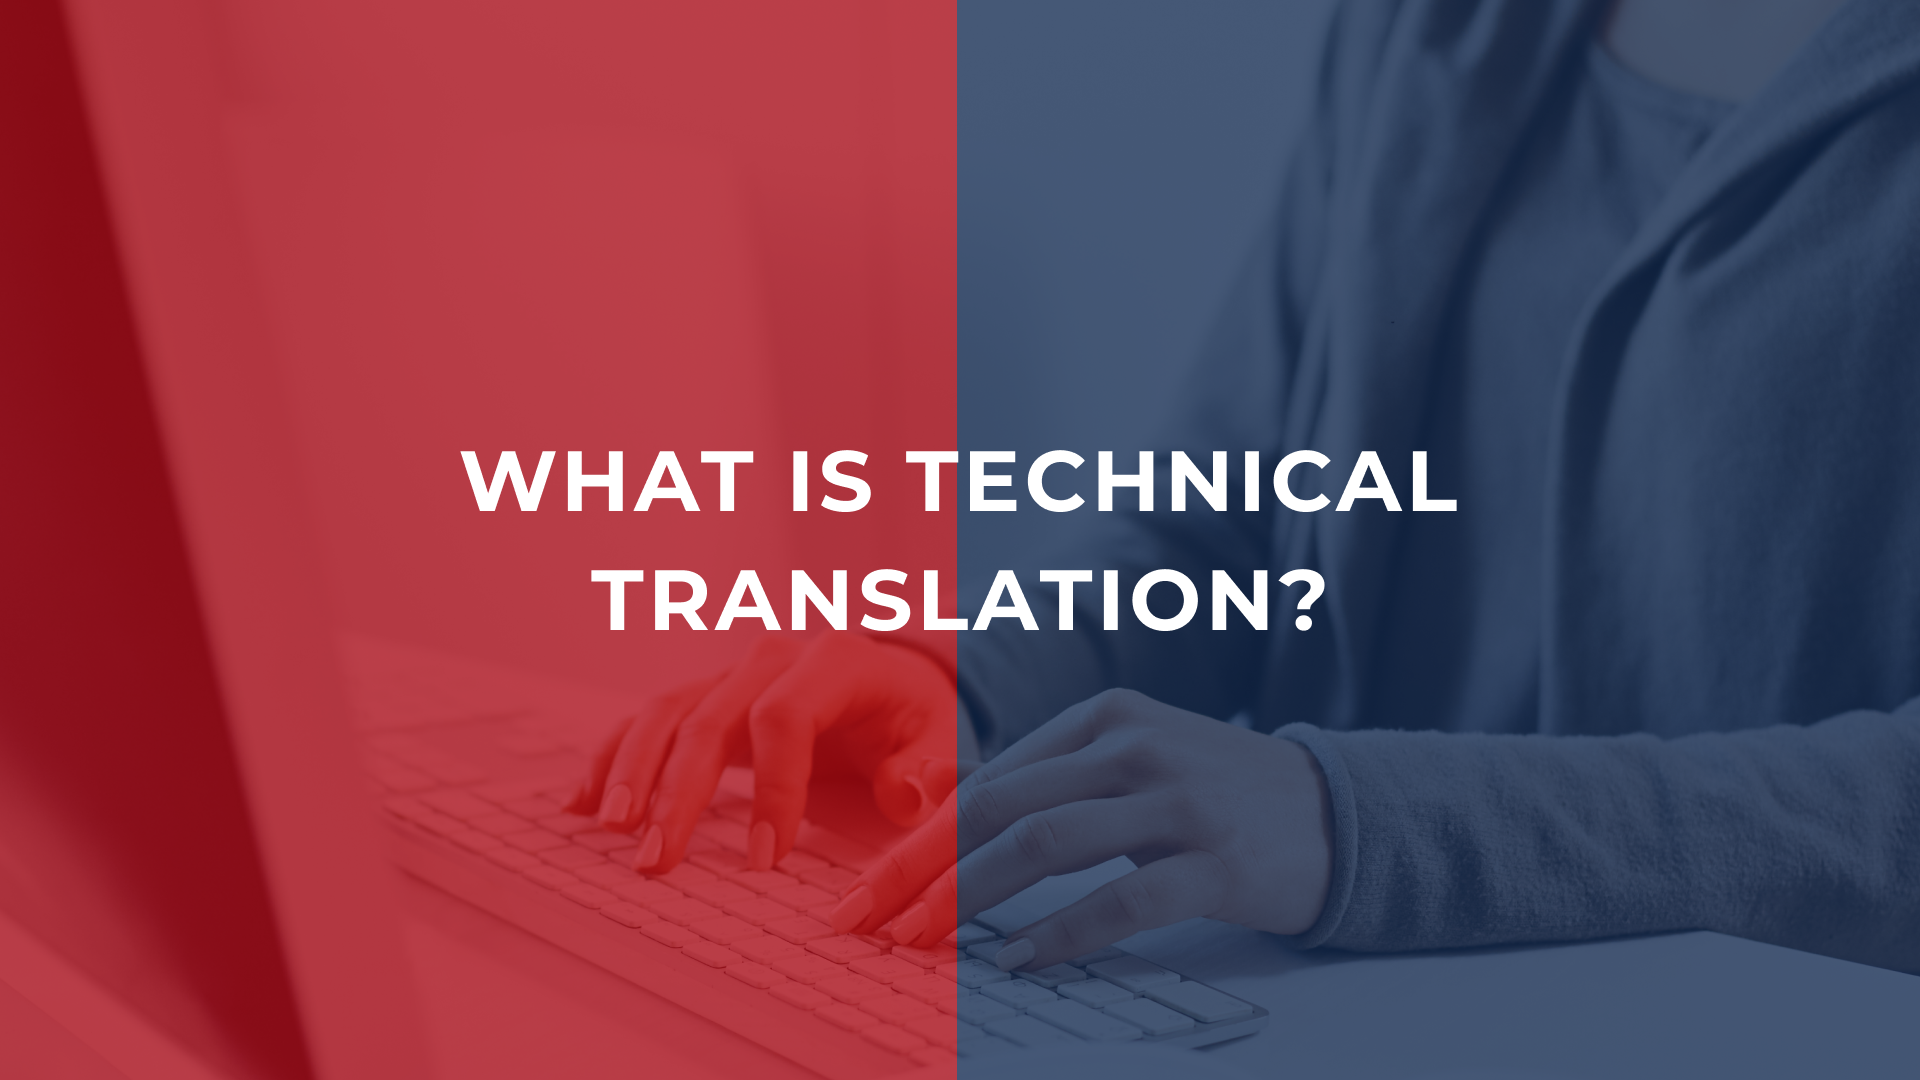 What is technical translation?